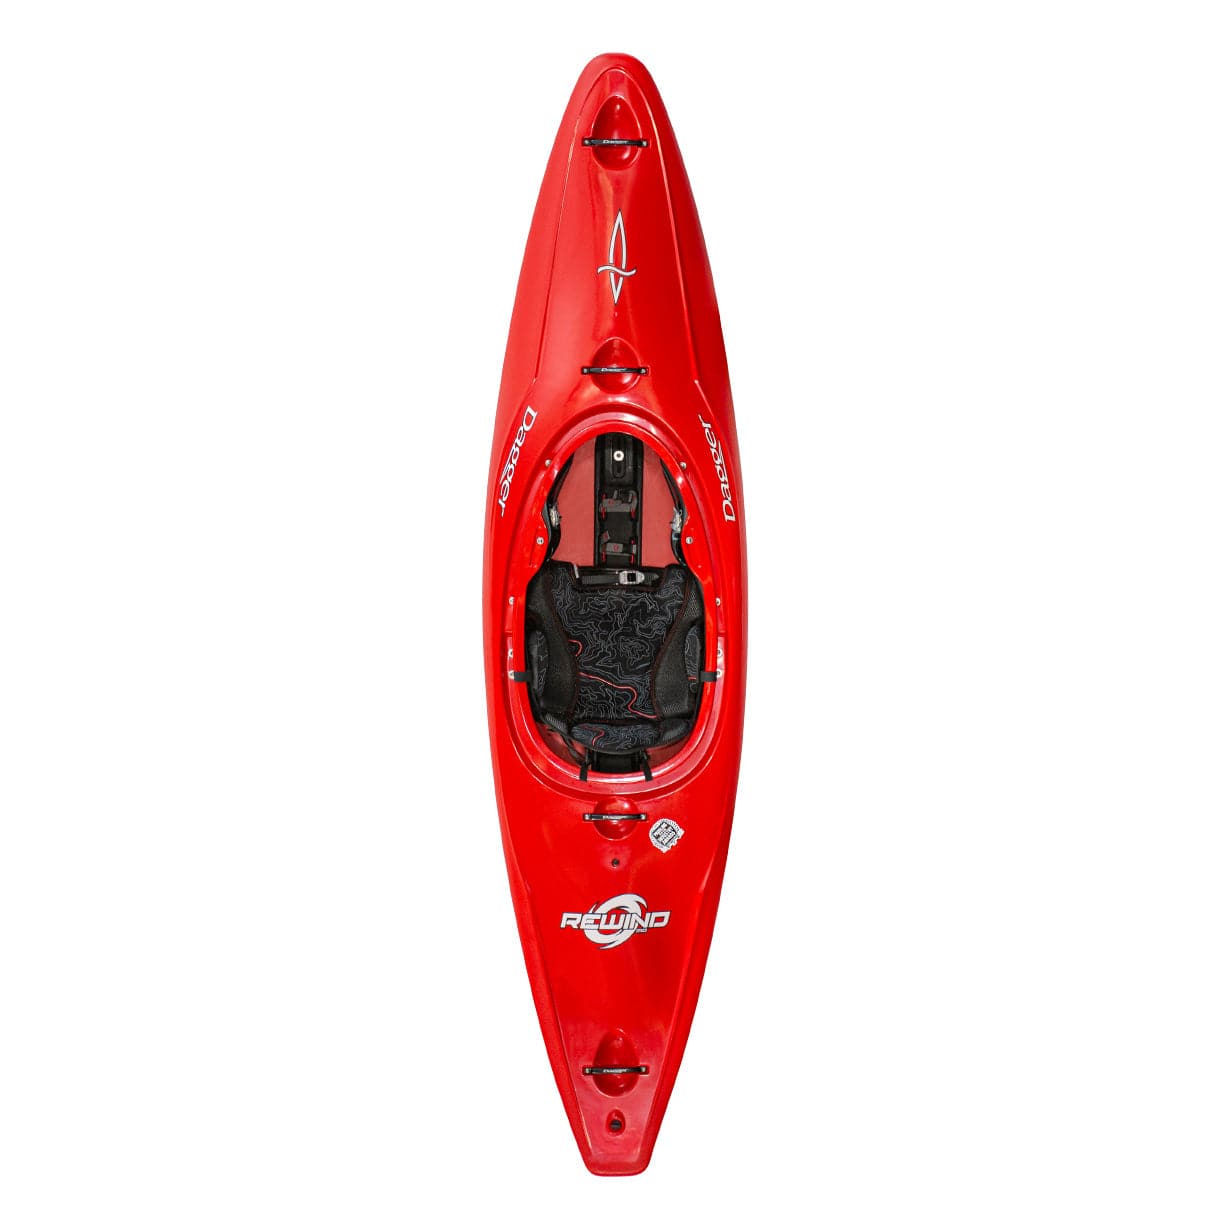 Red Dagger Rewind whitewater river play kayak with Contour Ergo Outfitting and new thigh brace system.